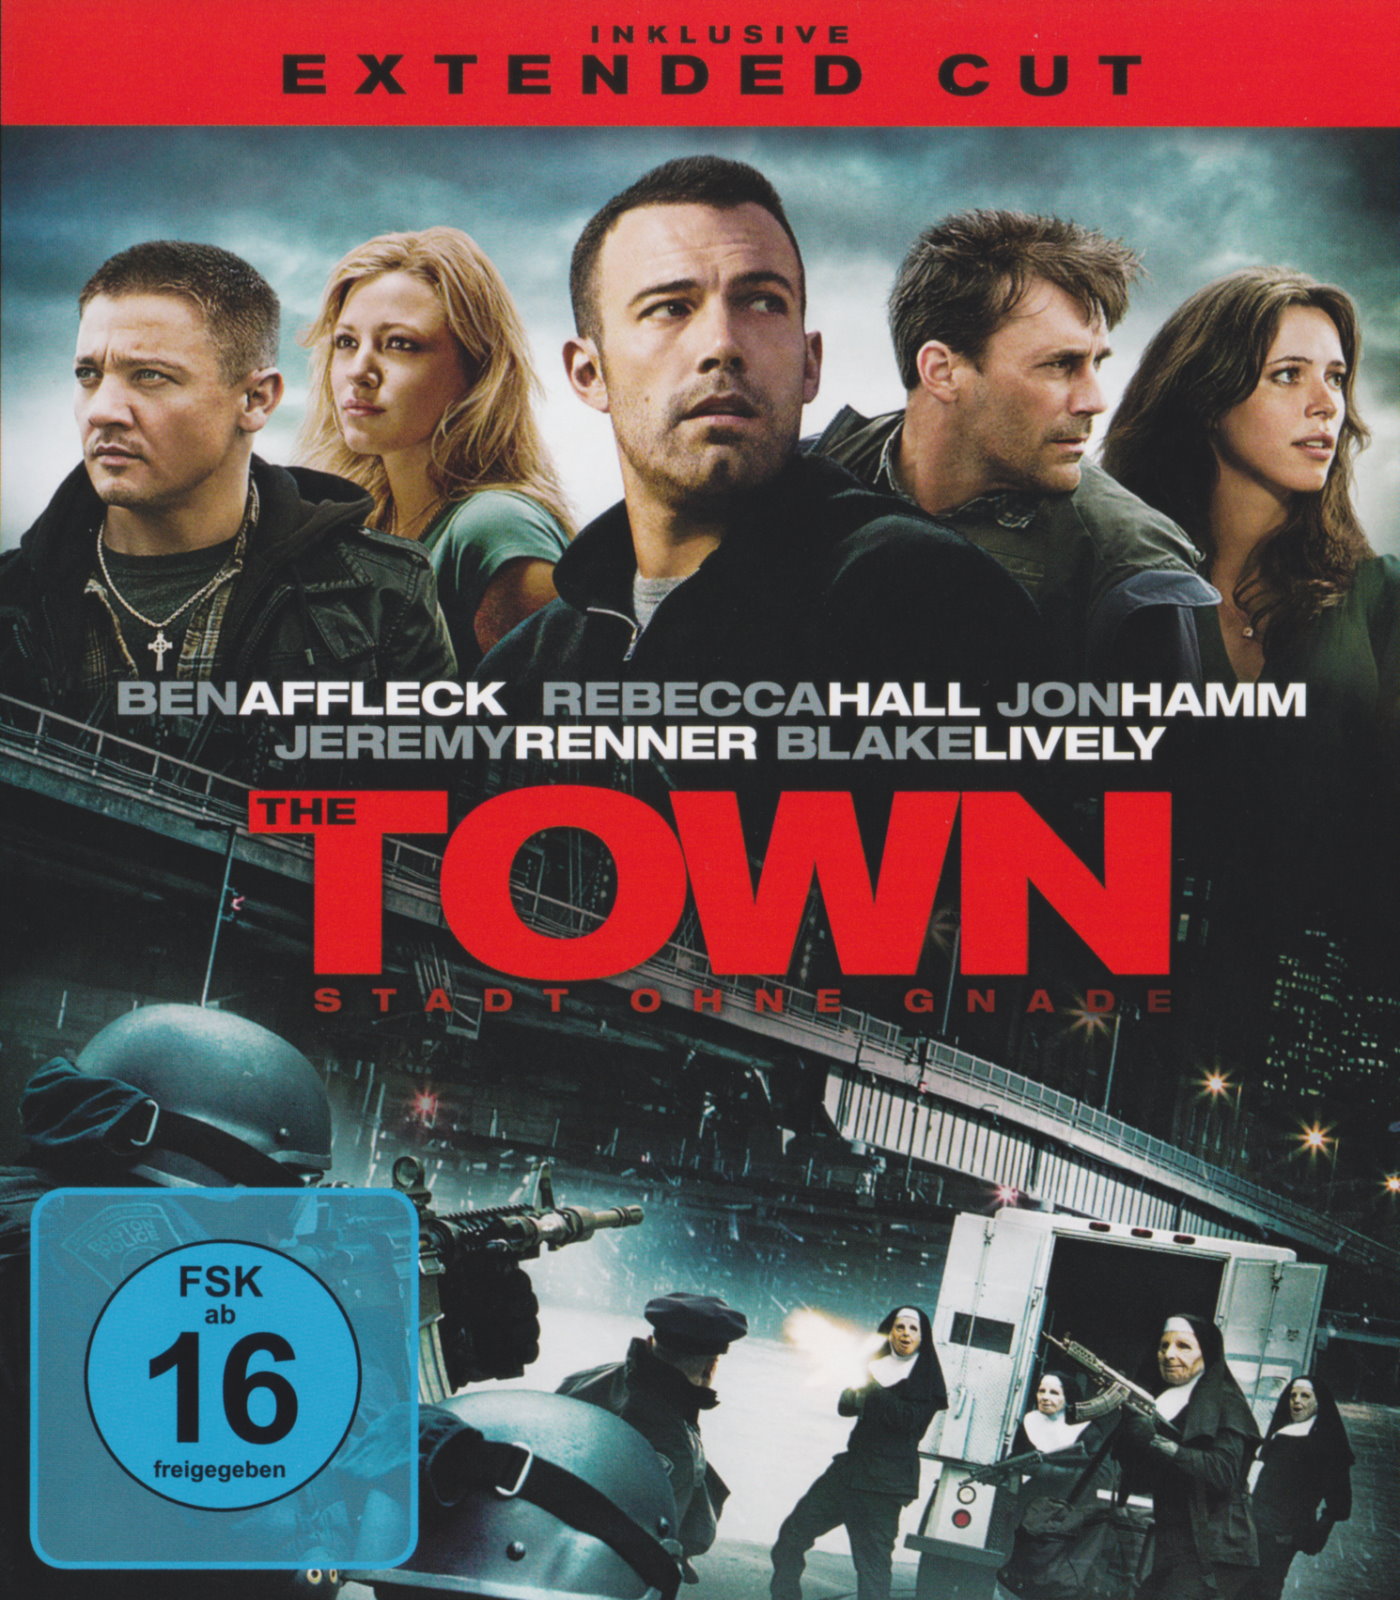 Cover - The Town - Stadt ohne Gnade.jpg